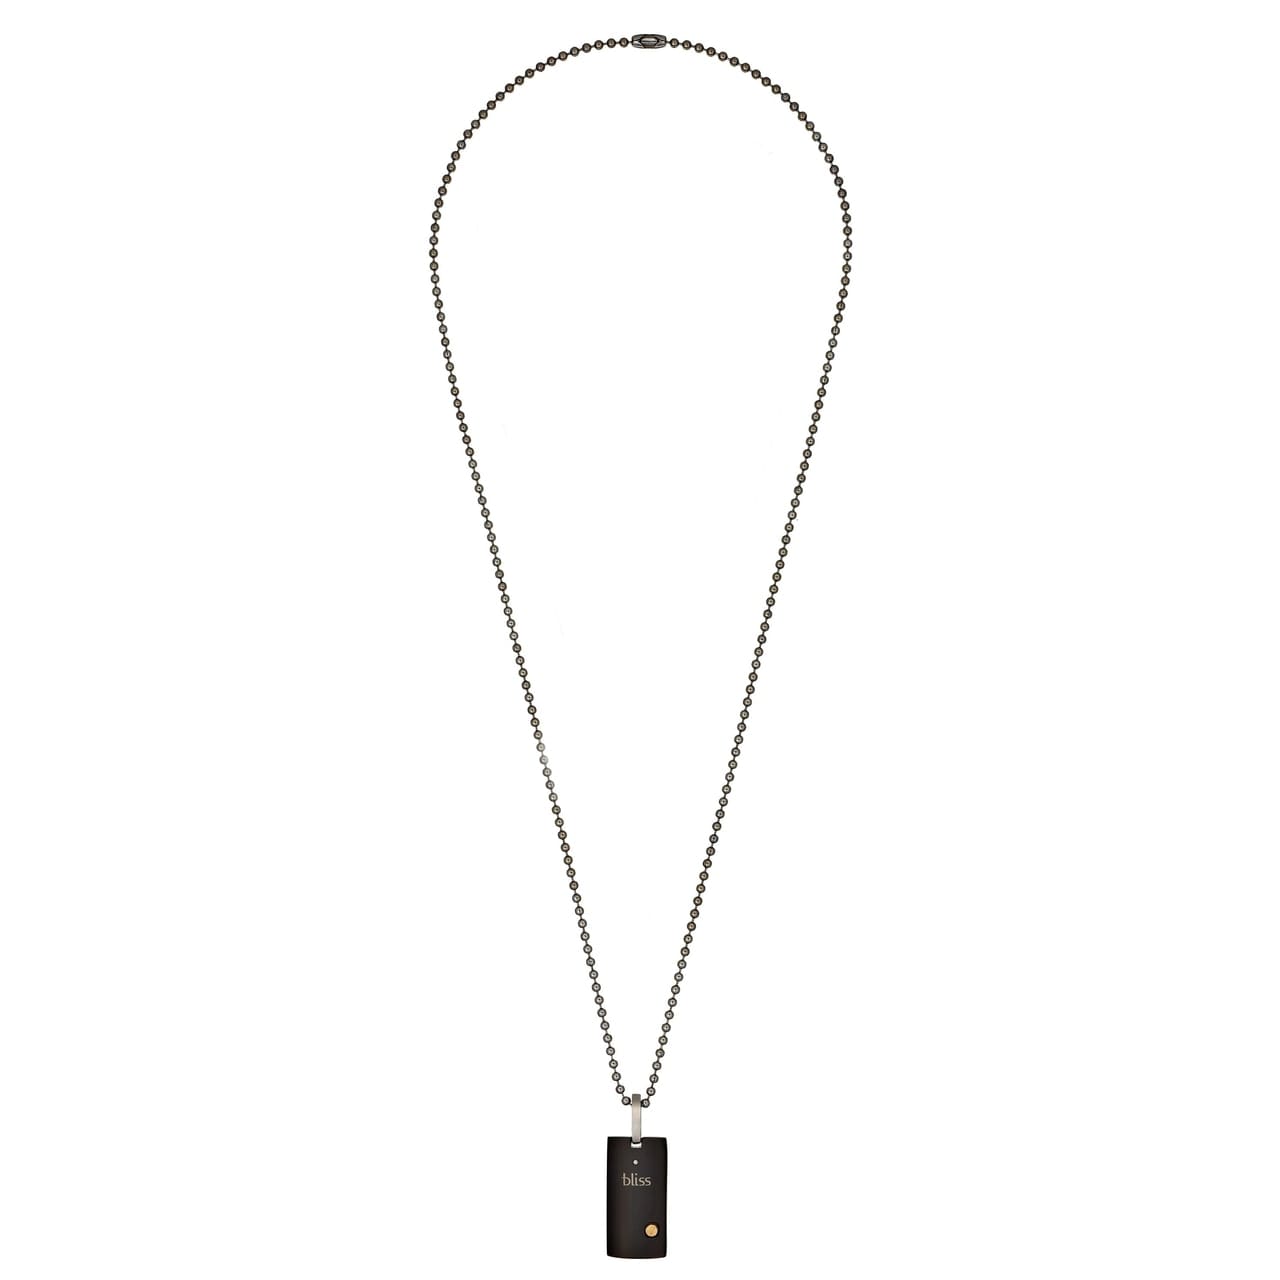 BLISS by Damiani "Uomo" Black Stainless Steel 18K Yellow Gold Pendant with Diamond Necklace 840771105494